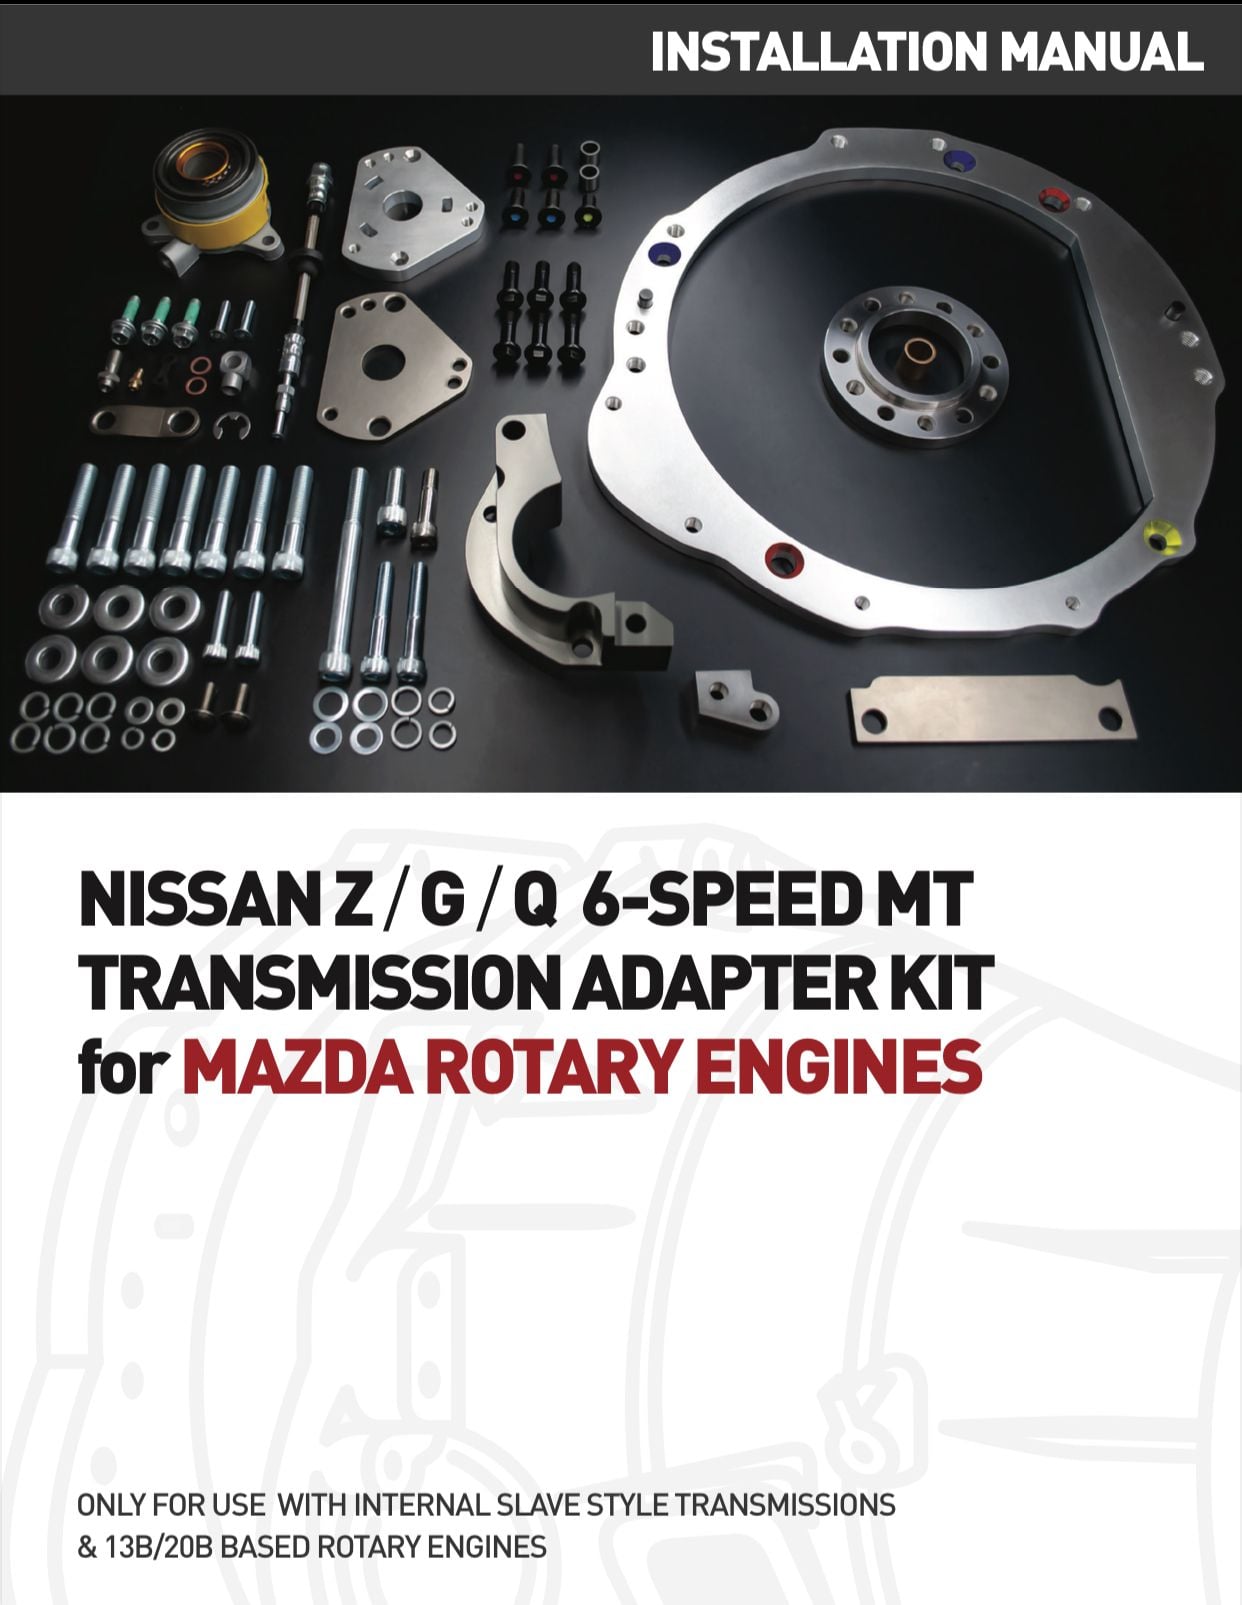 Drivetrain - “Careless” Nissan CD009 Transmission Adapter Kit for FD3S Chassis - New - 1993 to 2002 Mazda RX-7 - Dfw Metroplex, TX 00000, United States